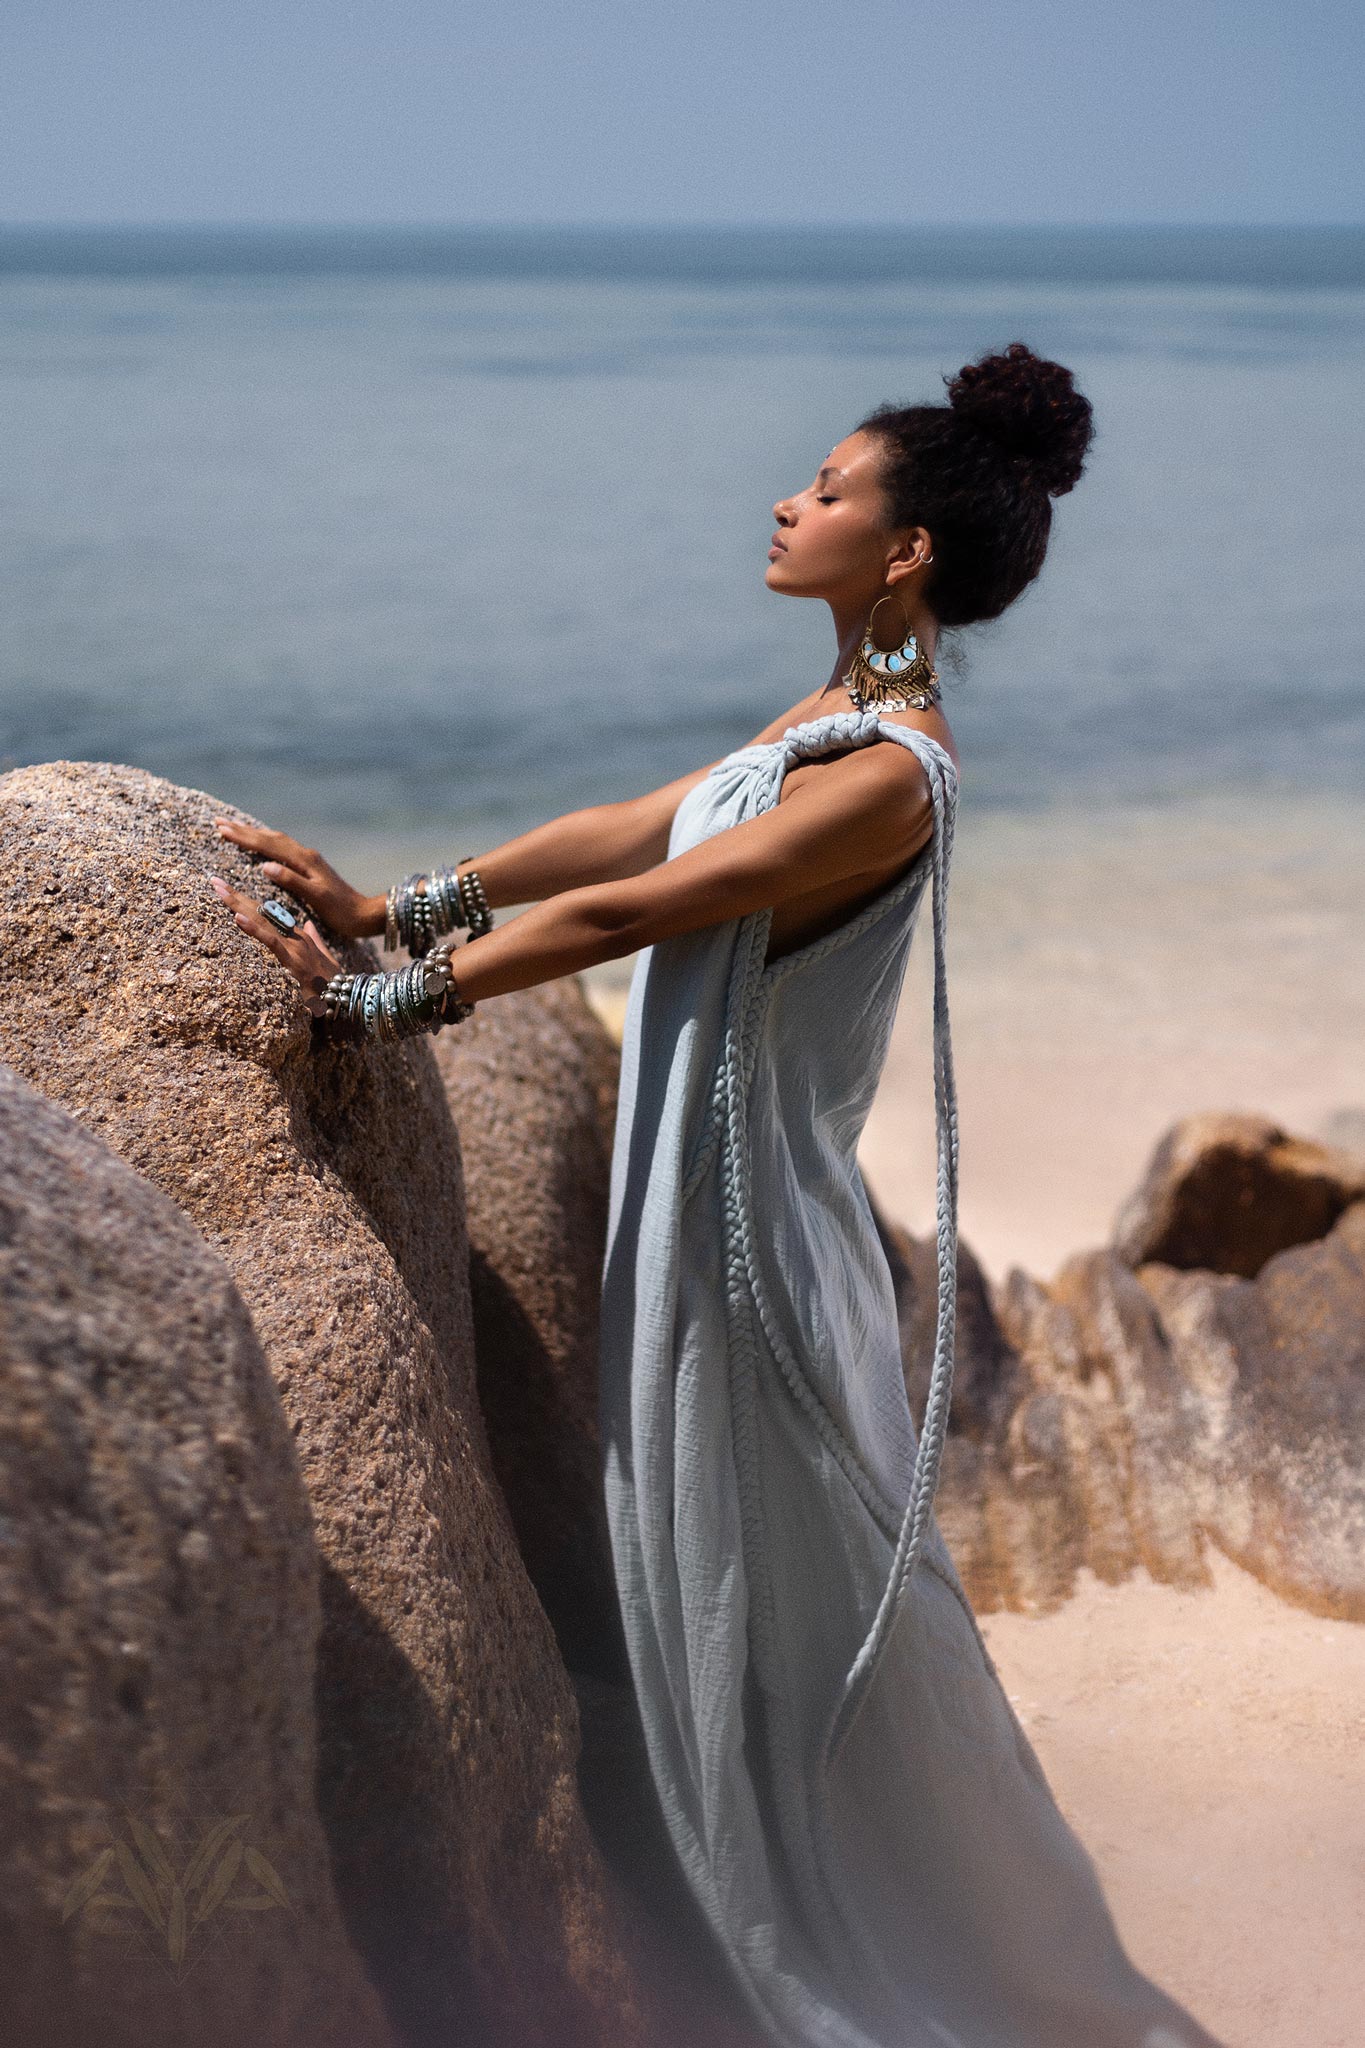 Experience Comfort and Style with Our Oversized One Shoulder Greek Goddess Dress by AYA Sacred Wear.